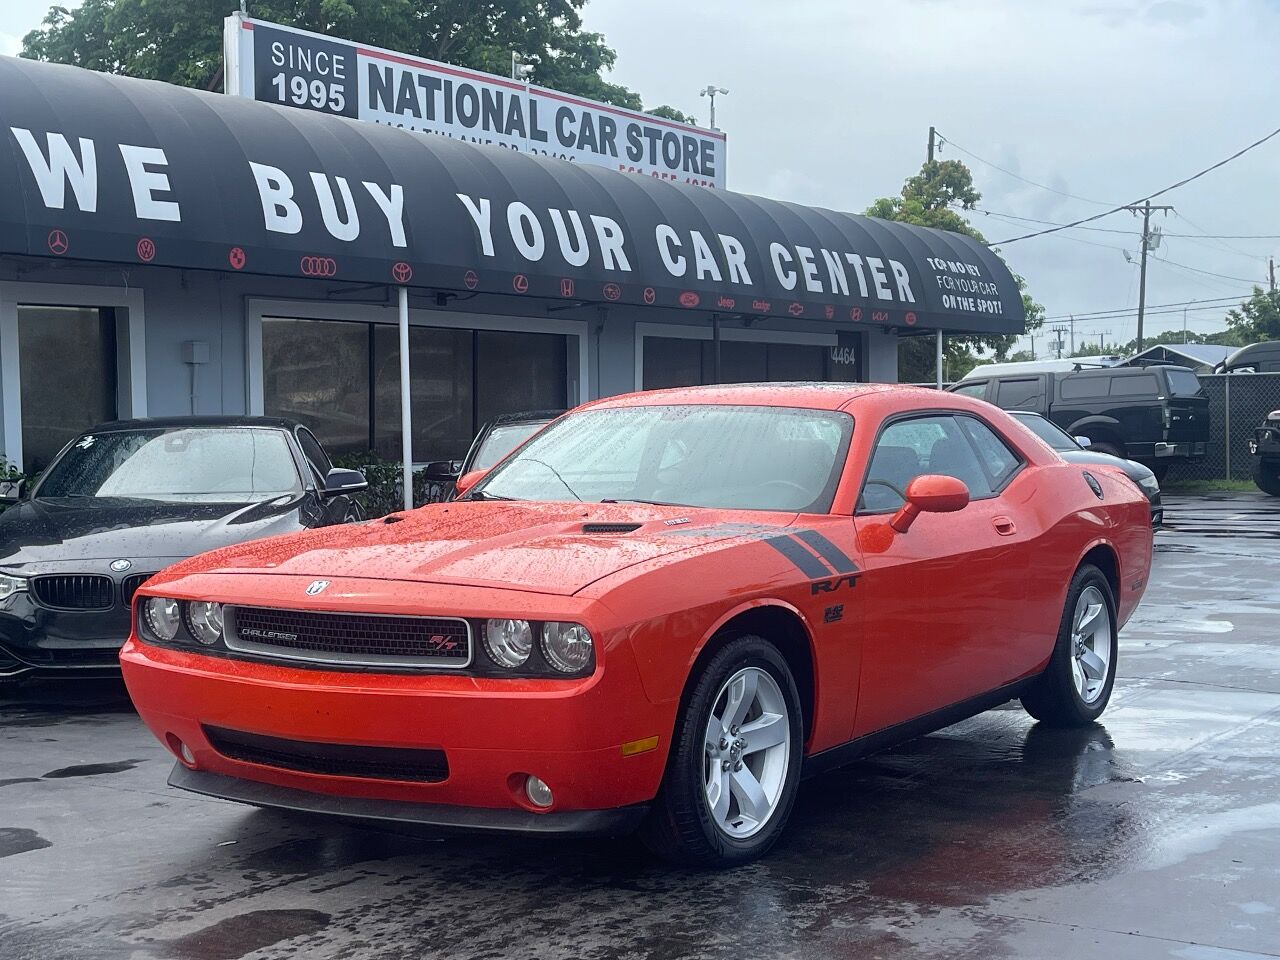 2010 DODGE Challenger Coupe - $16,690